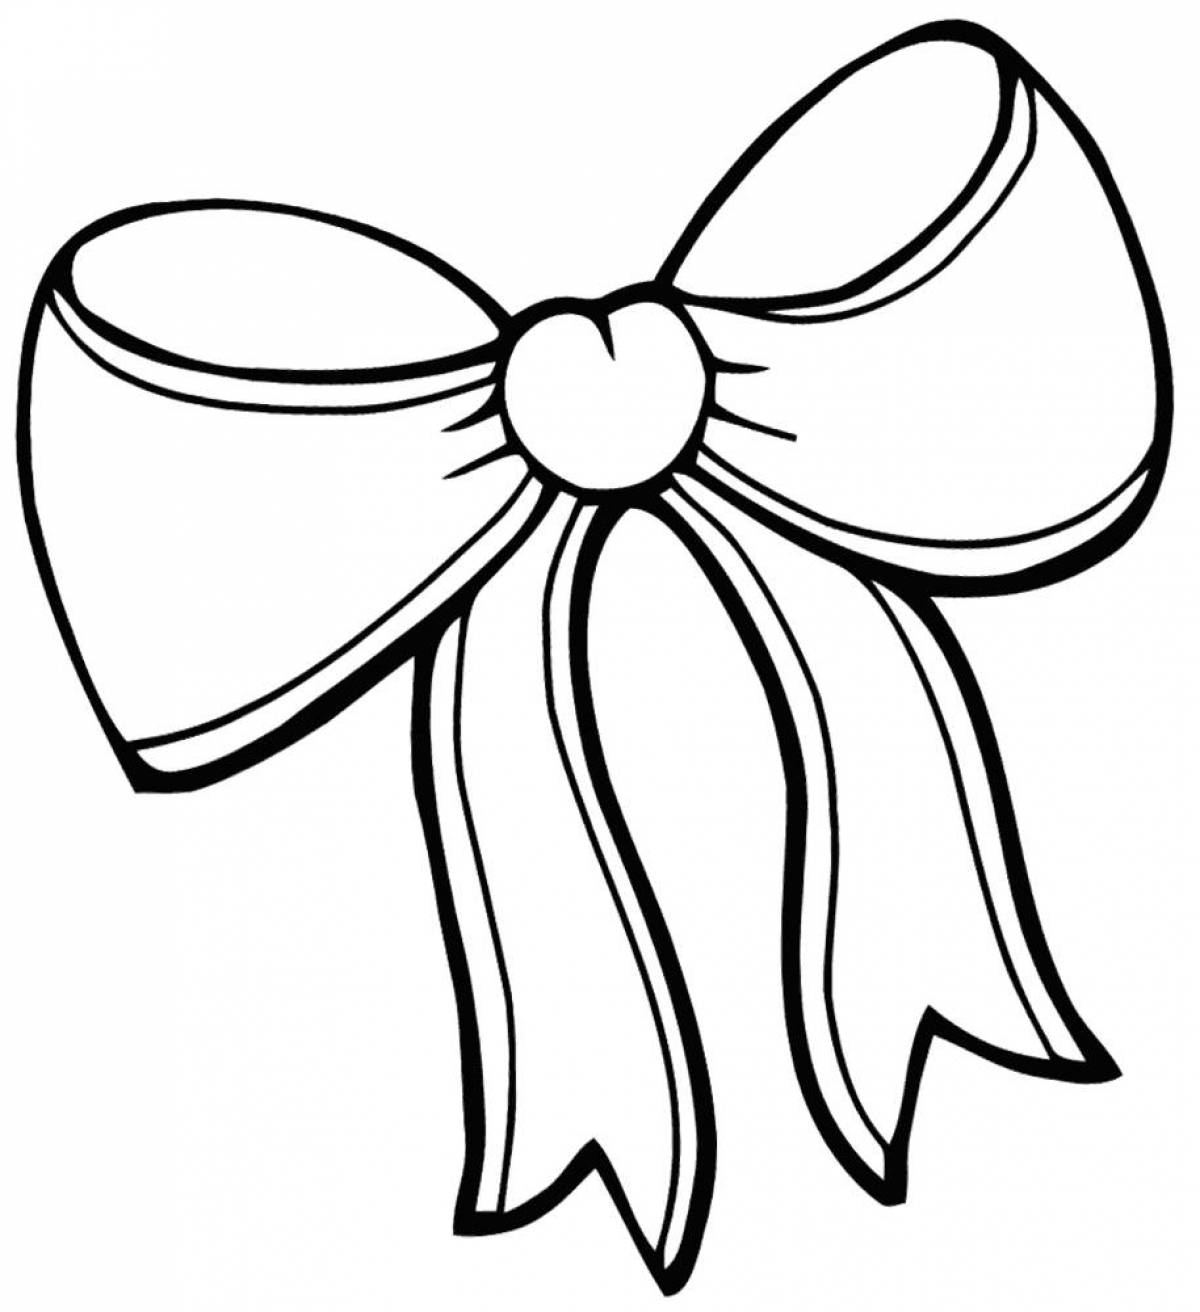 Coloring fluffy bow